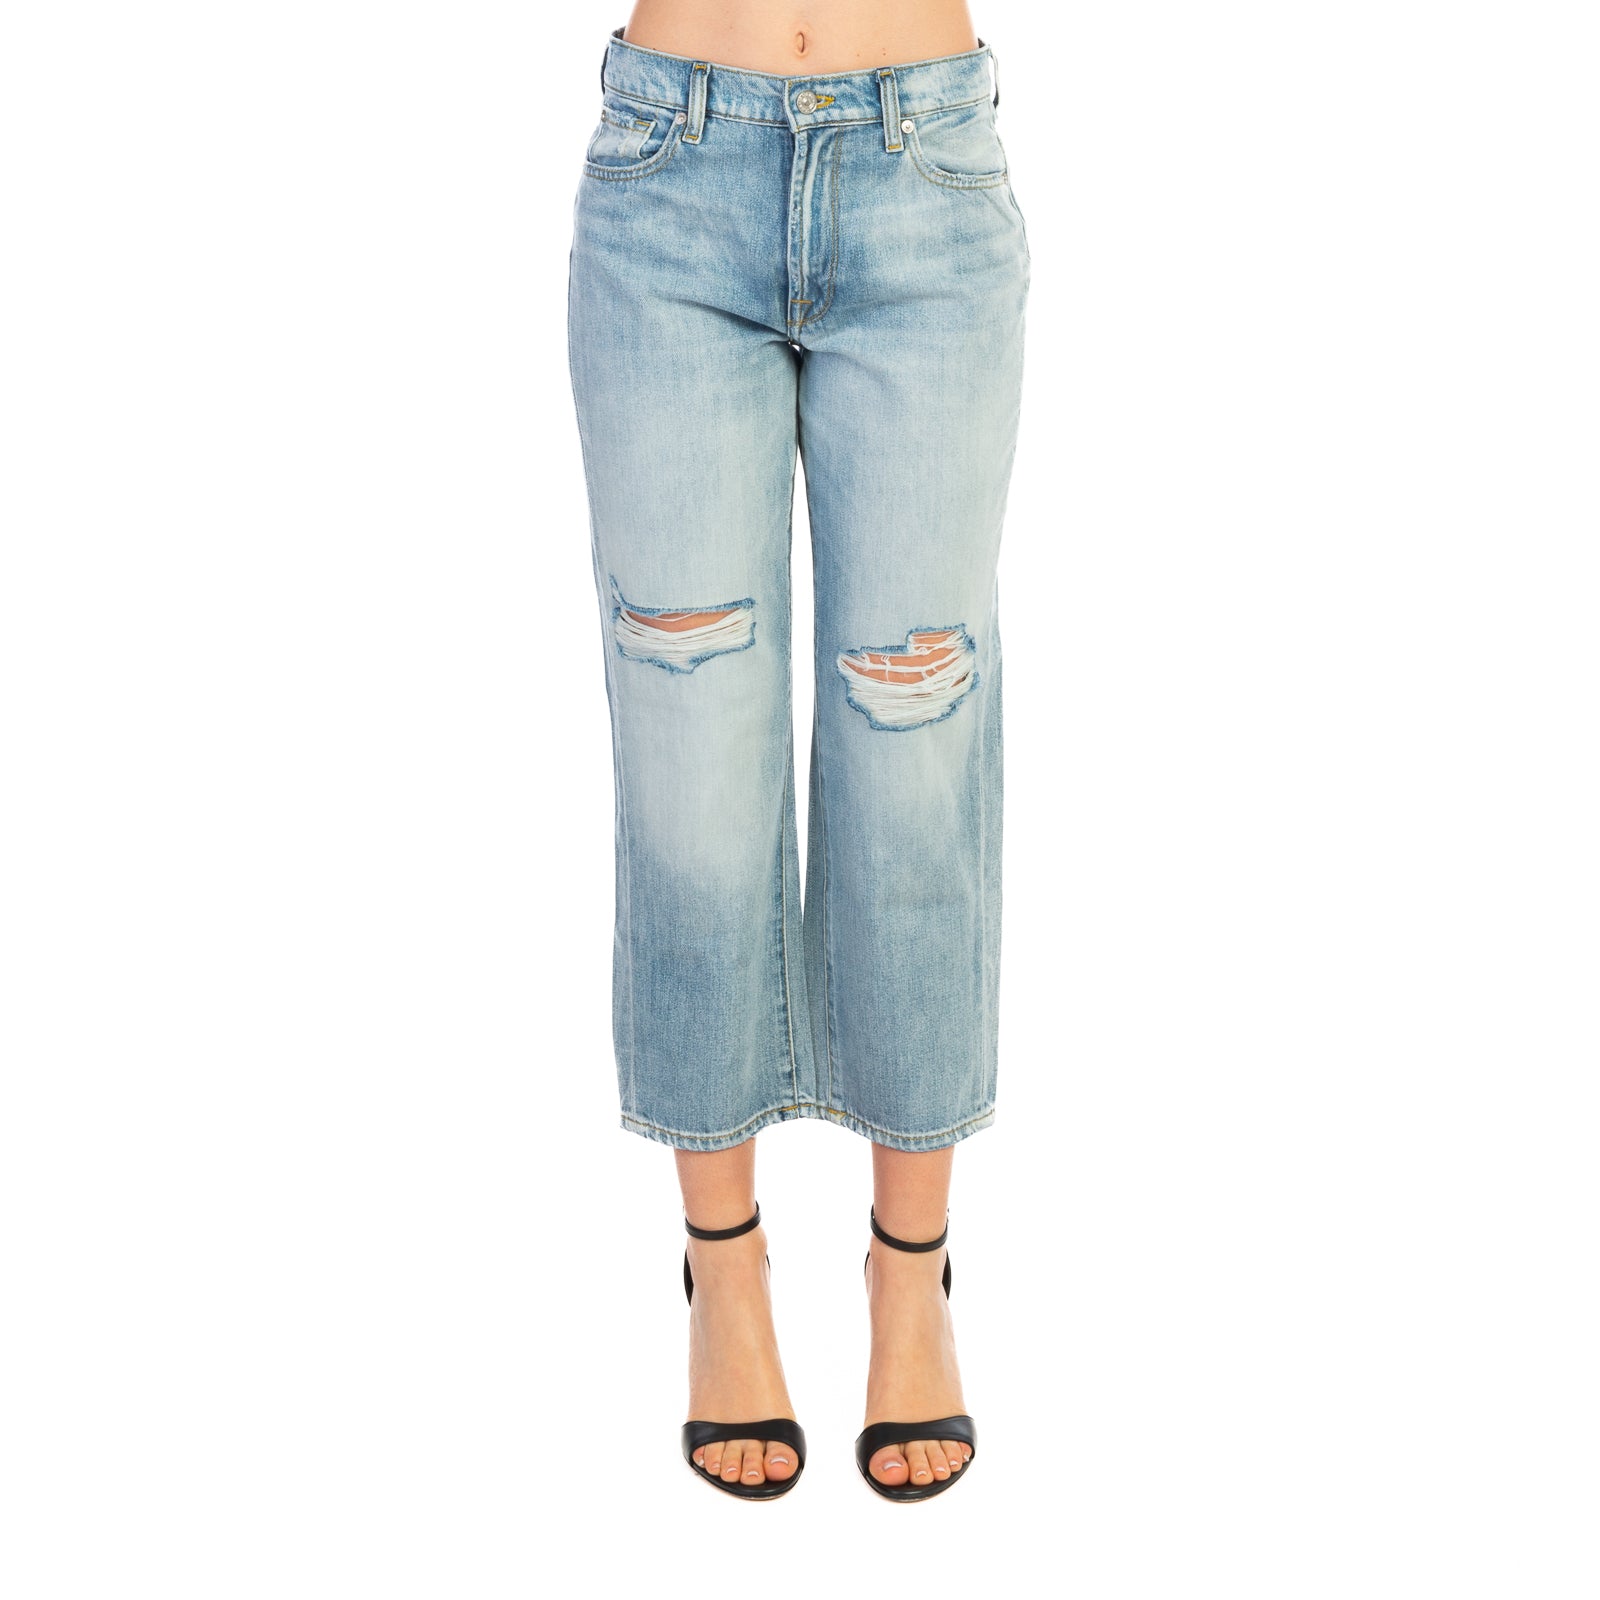 Jeans 7 FOR ALL MANKIND The modern straight
Celeste